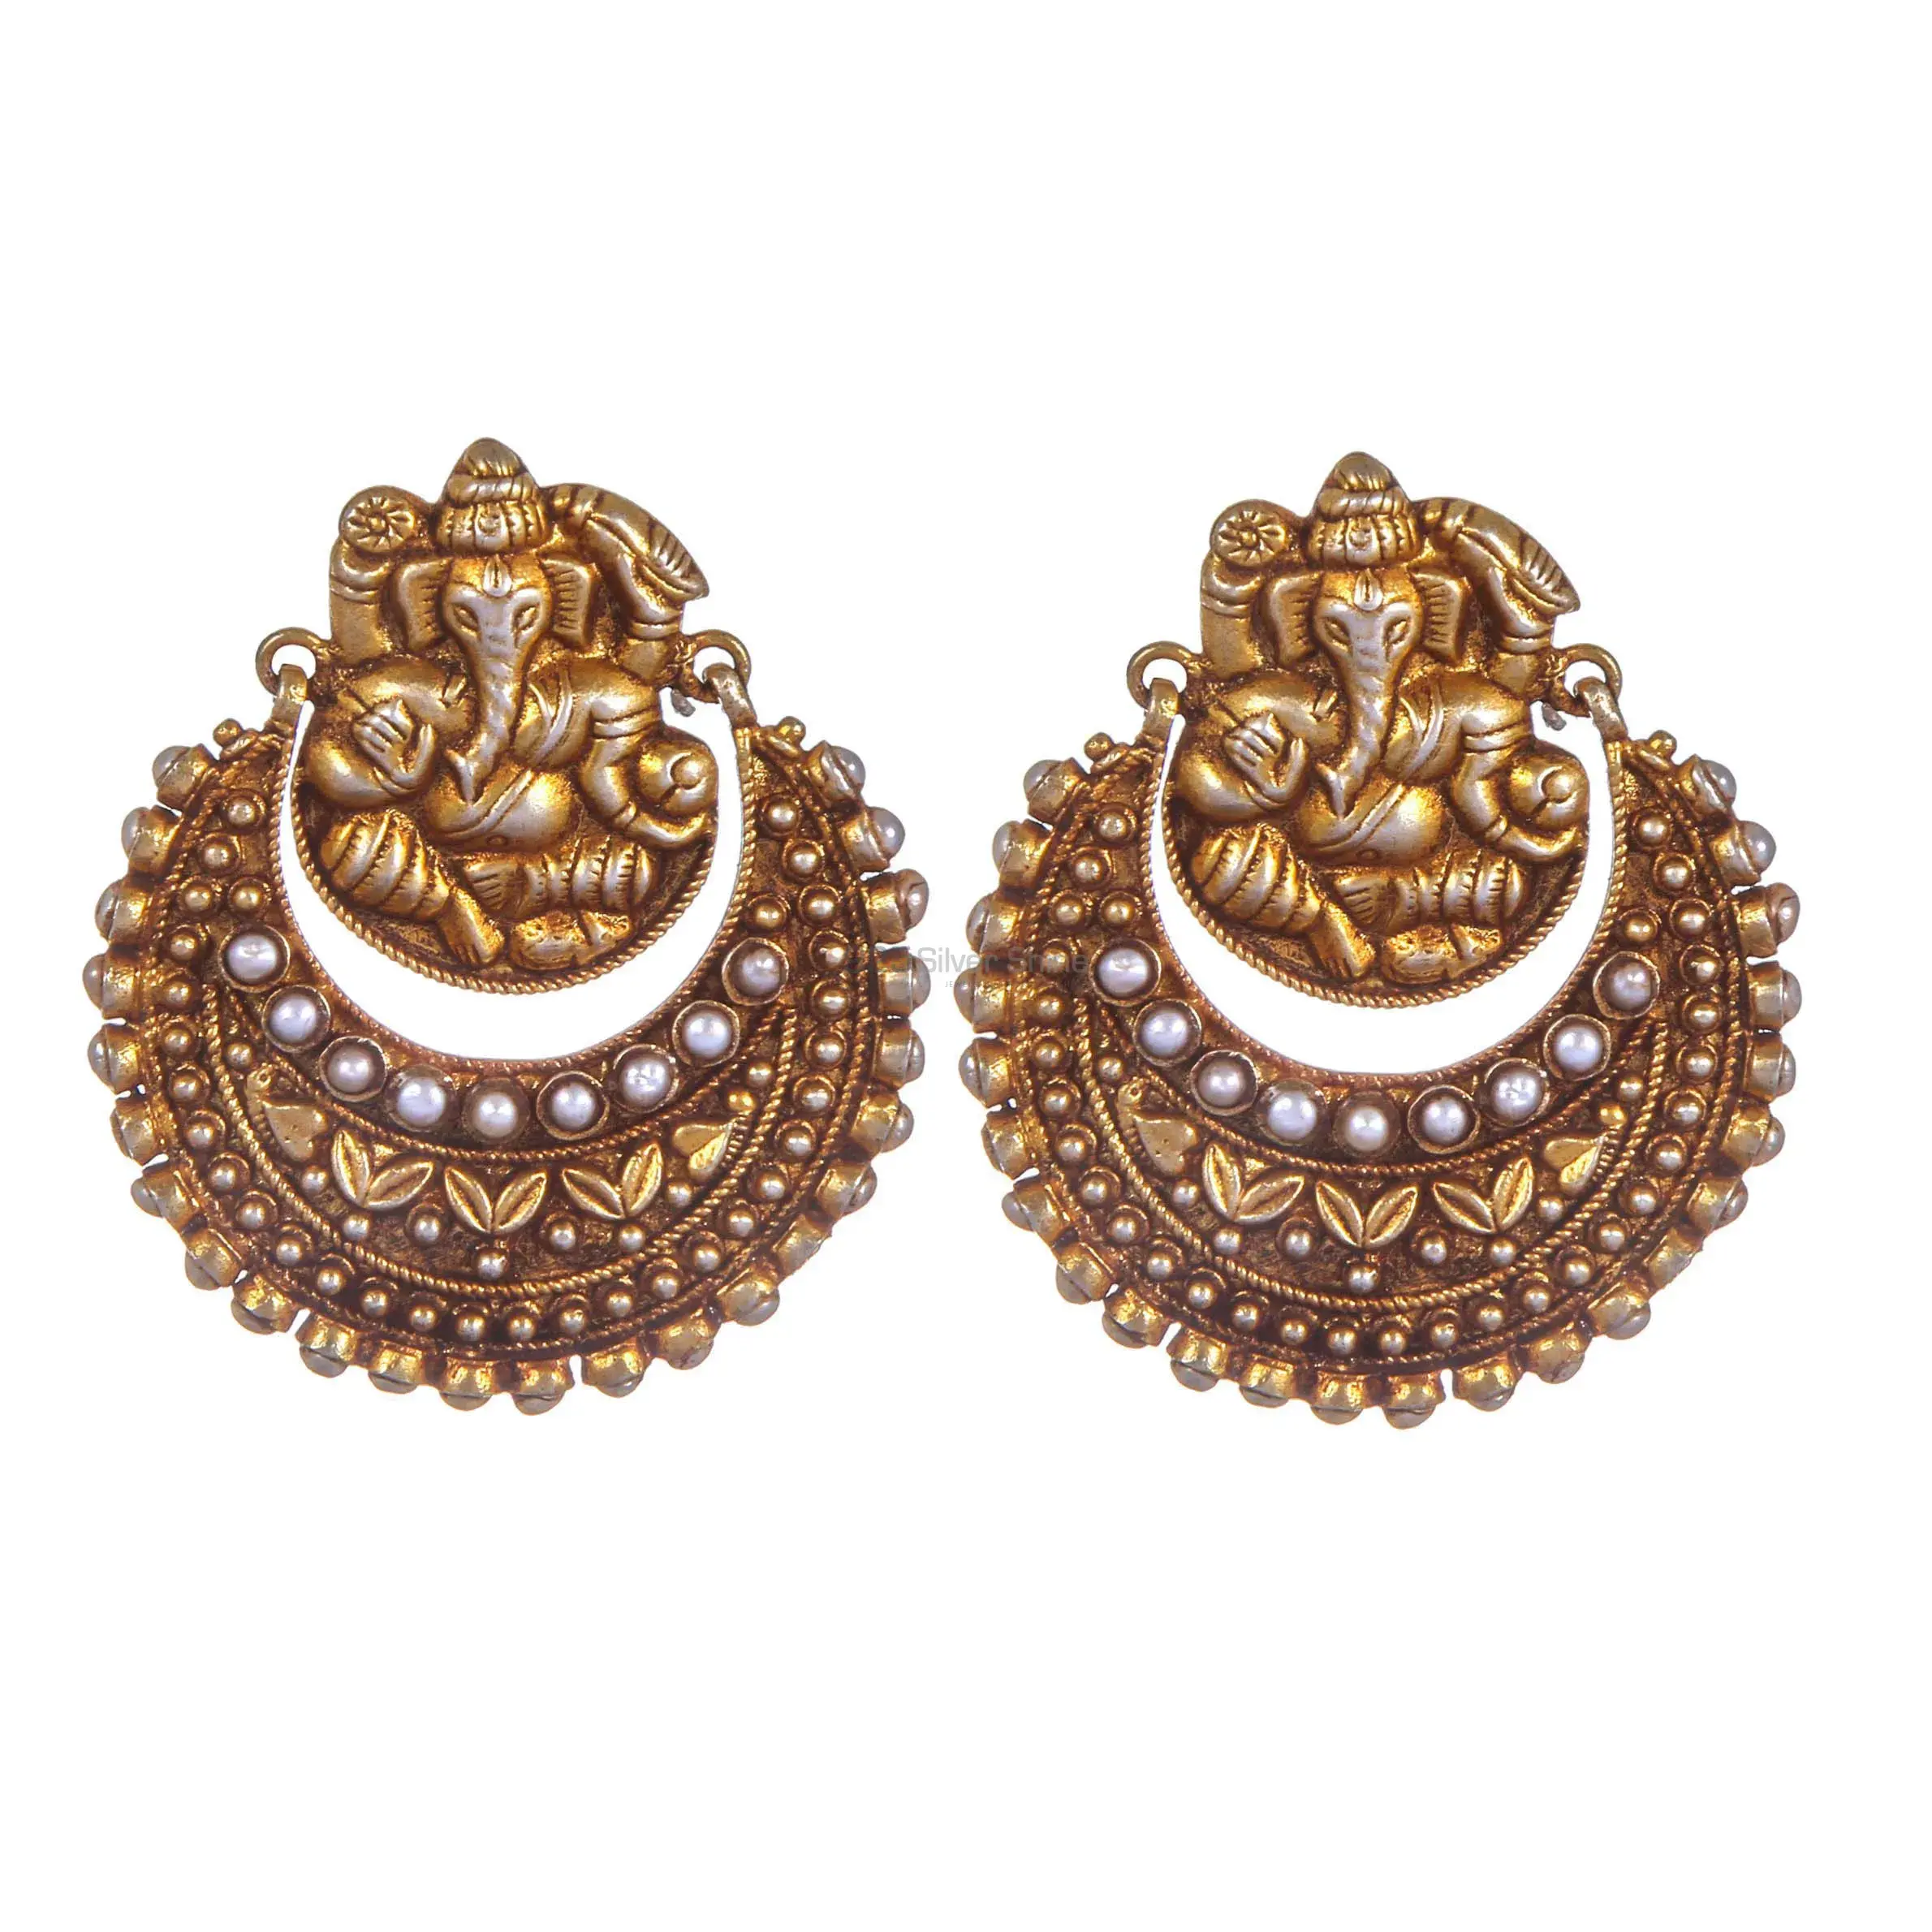 Silver Gold Plated Earrings | Gold jewellery design, Gold jewelry fashion, Gold  plated earrings